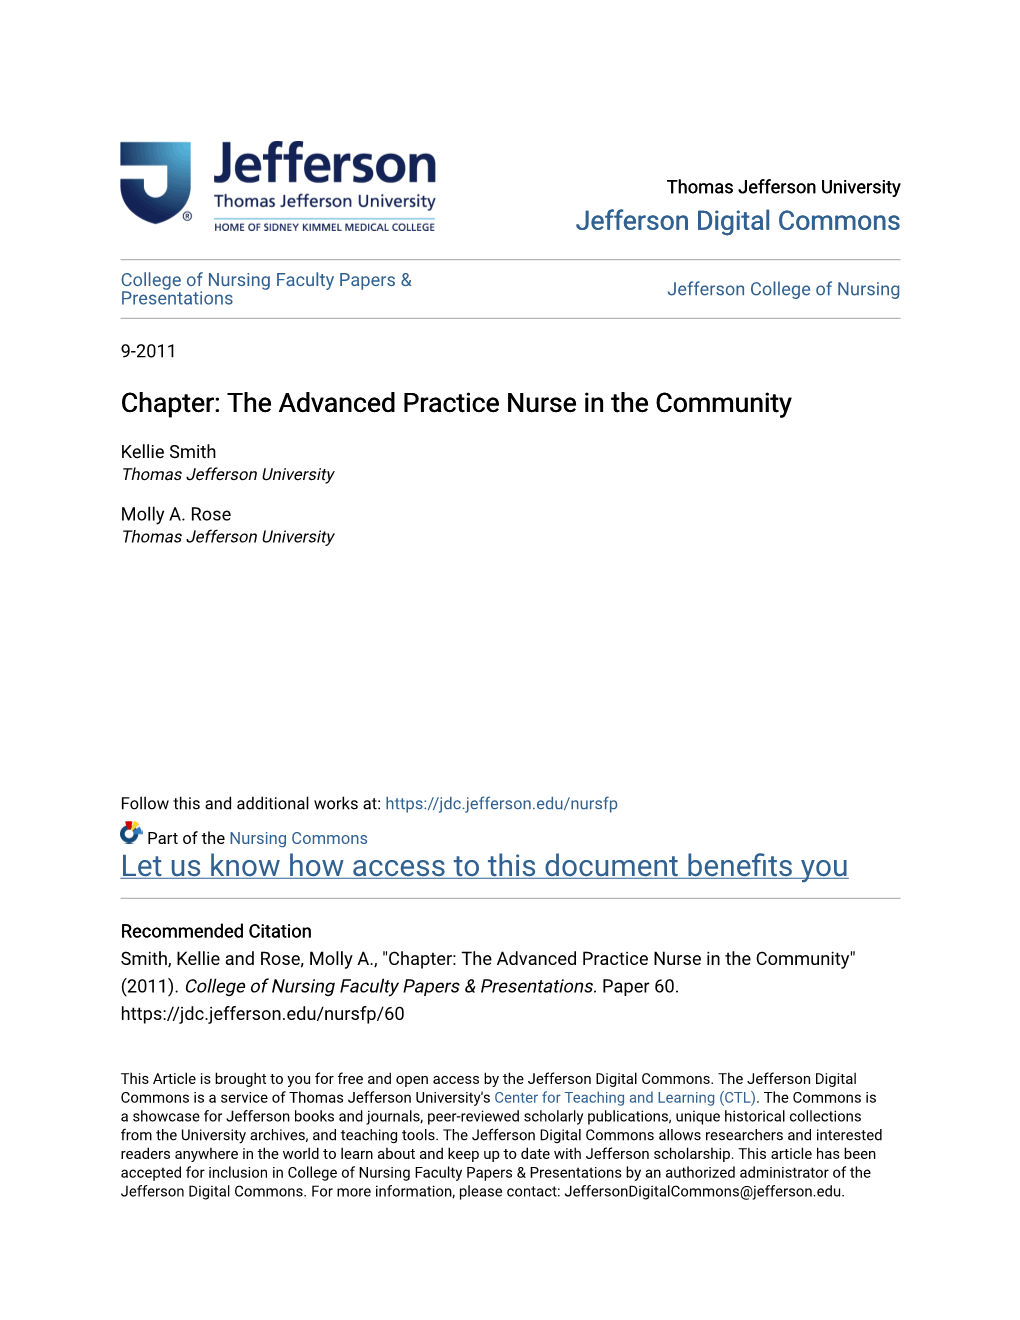 The Advanced Practice Nurse in the Community